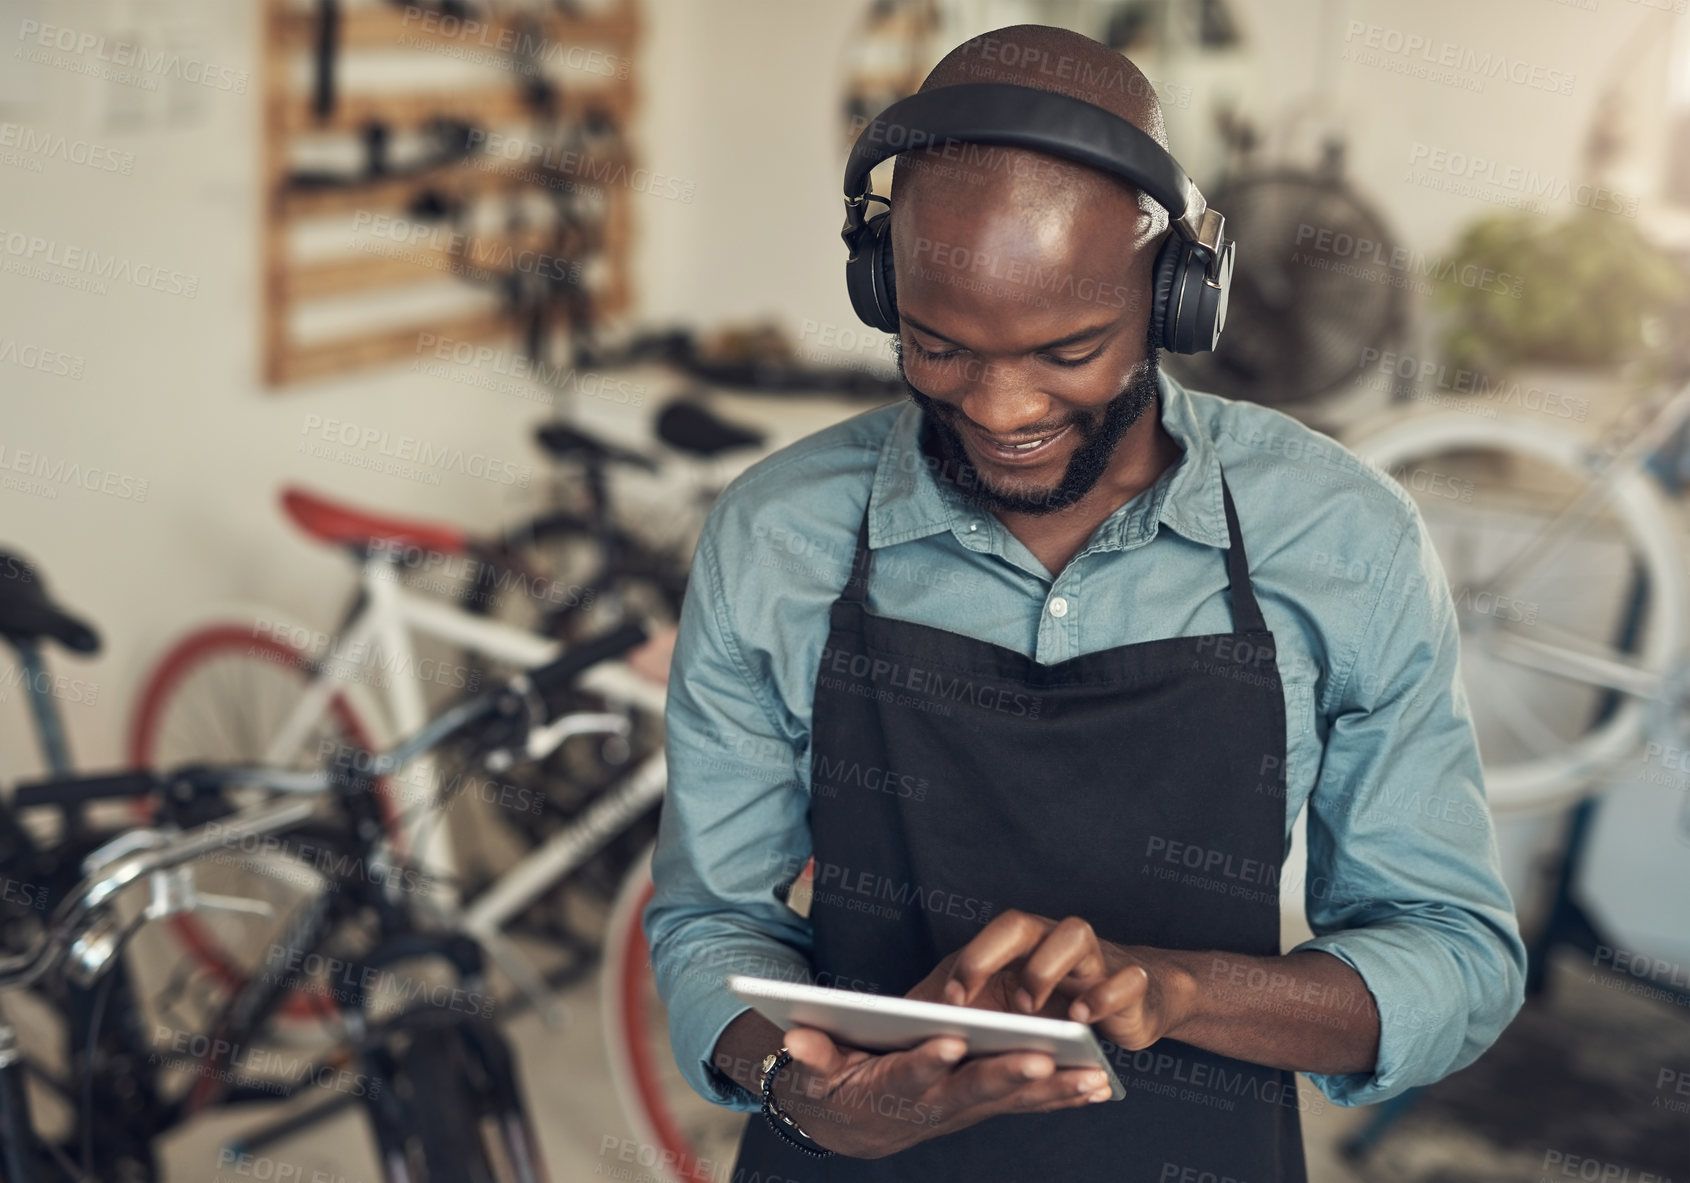 Buy stock photo Shot of a handsome young man standing alone in his bicycle shop and using a digital tablet while wearing headphones